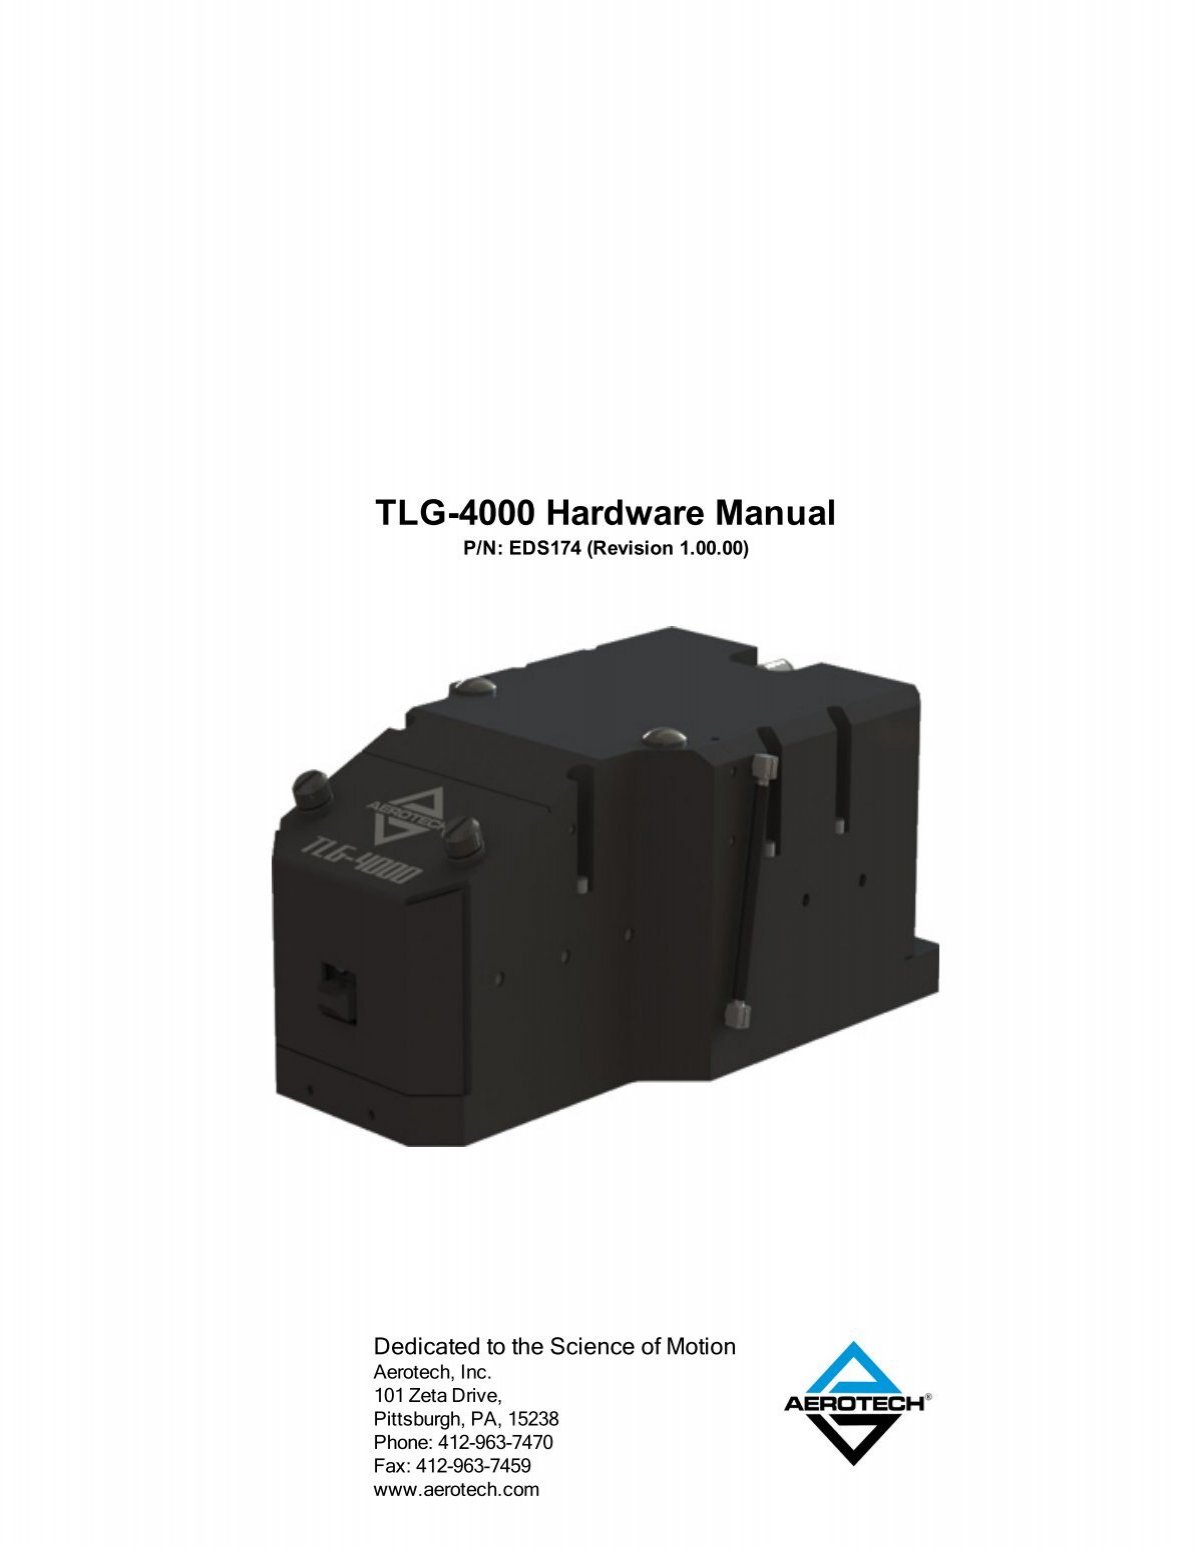 TLG-4000 Hardware Manual - Motion Control Clearance Items